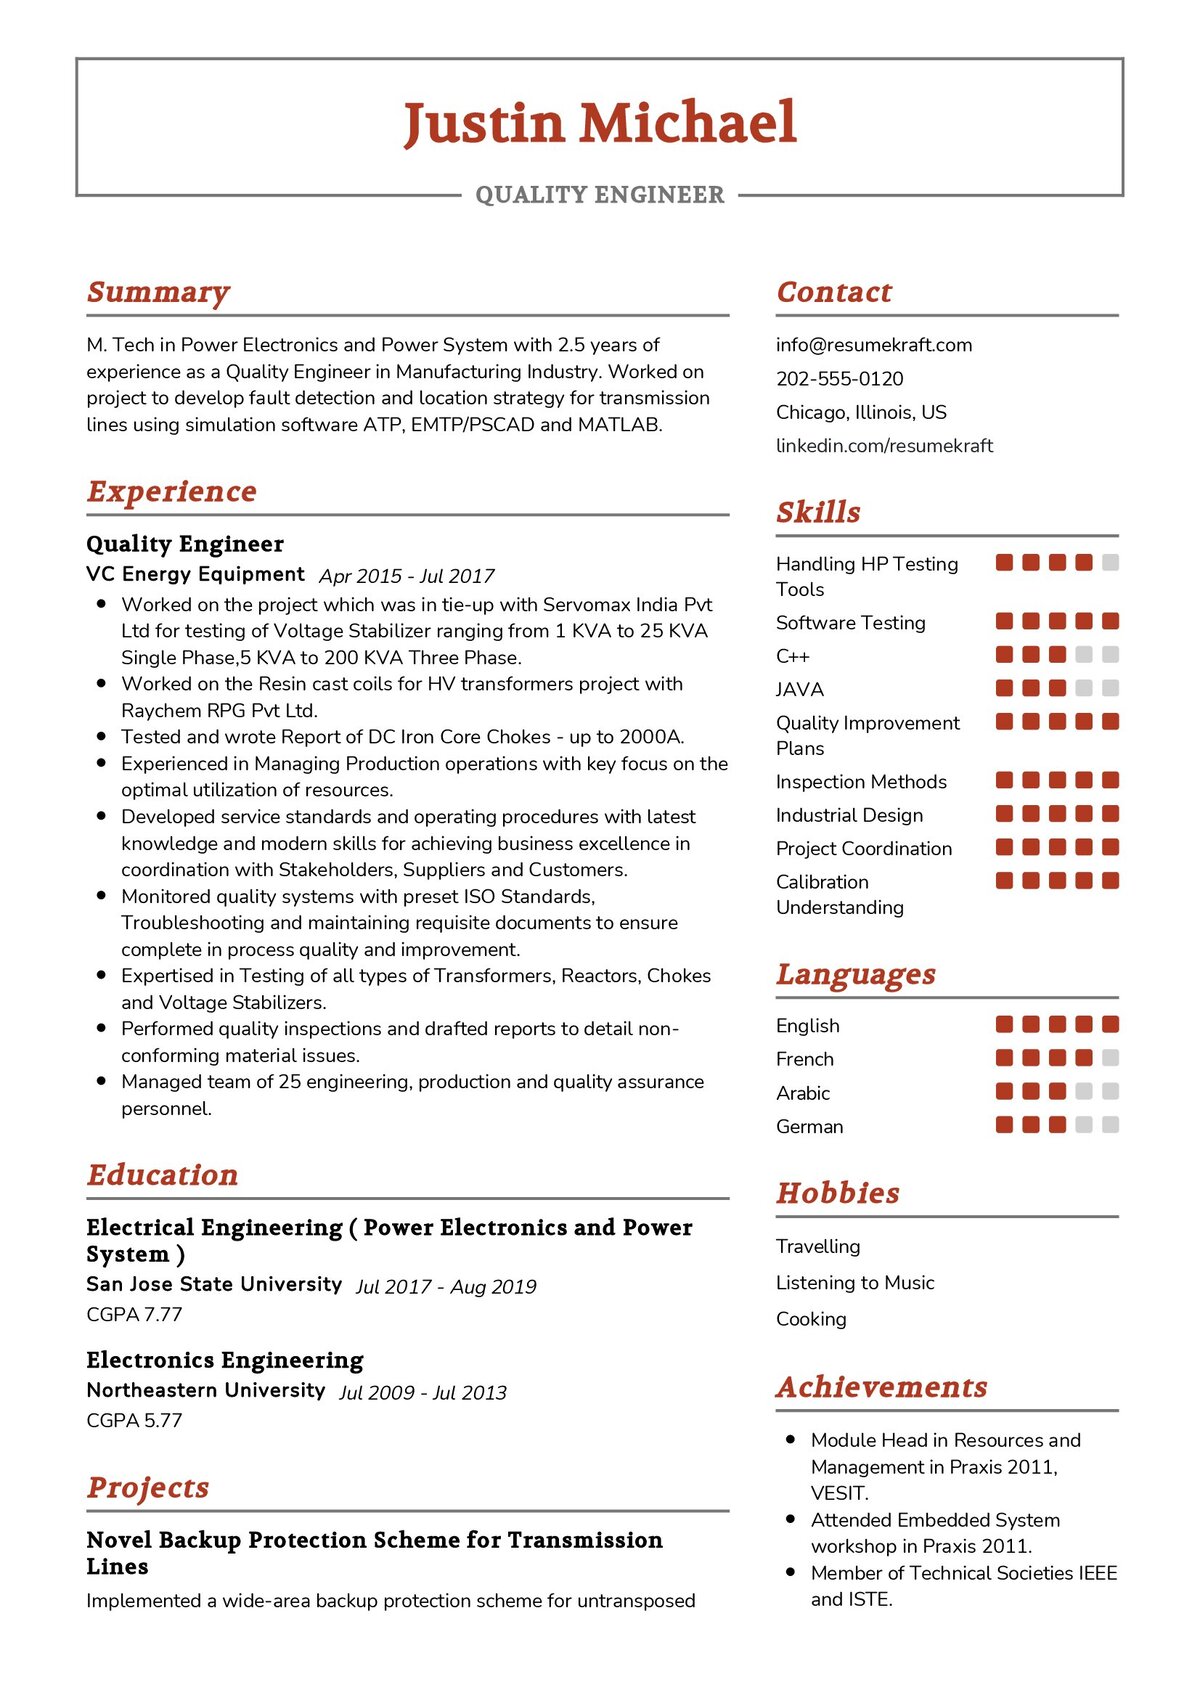 resume format for quality analyst